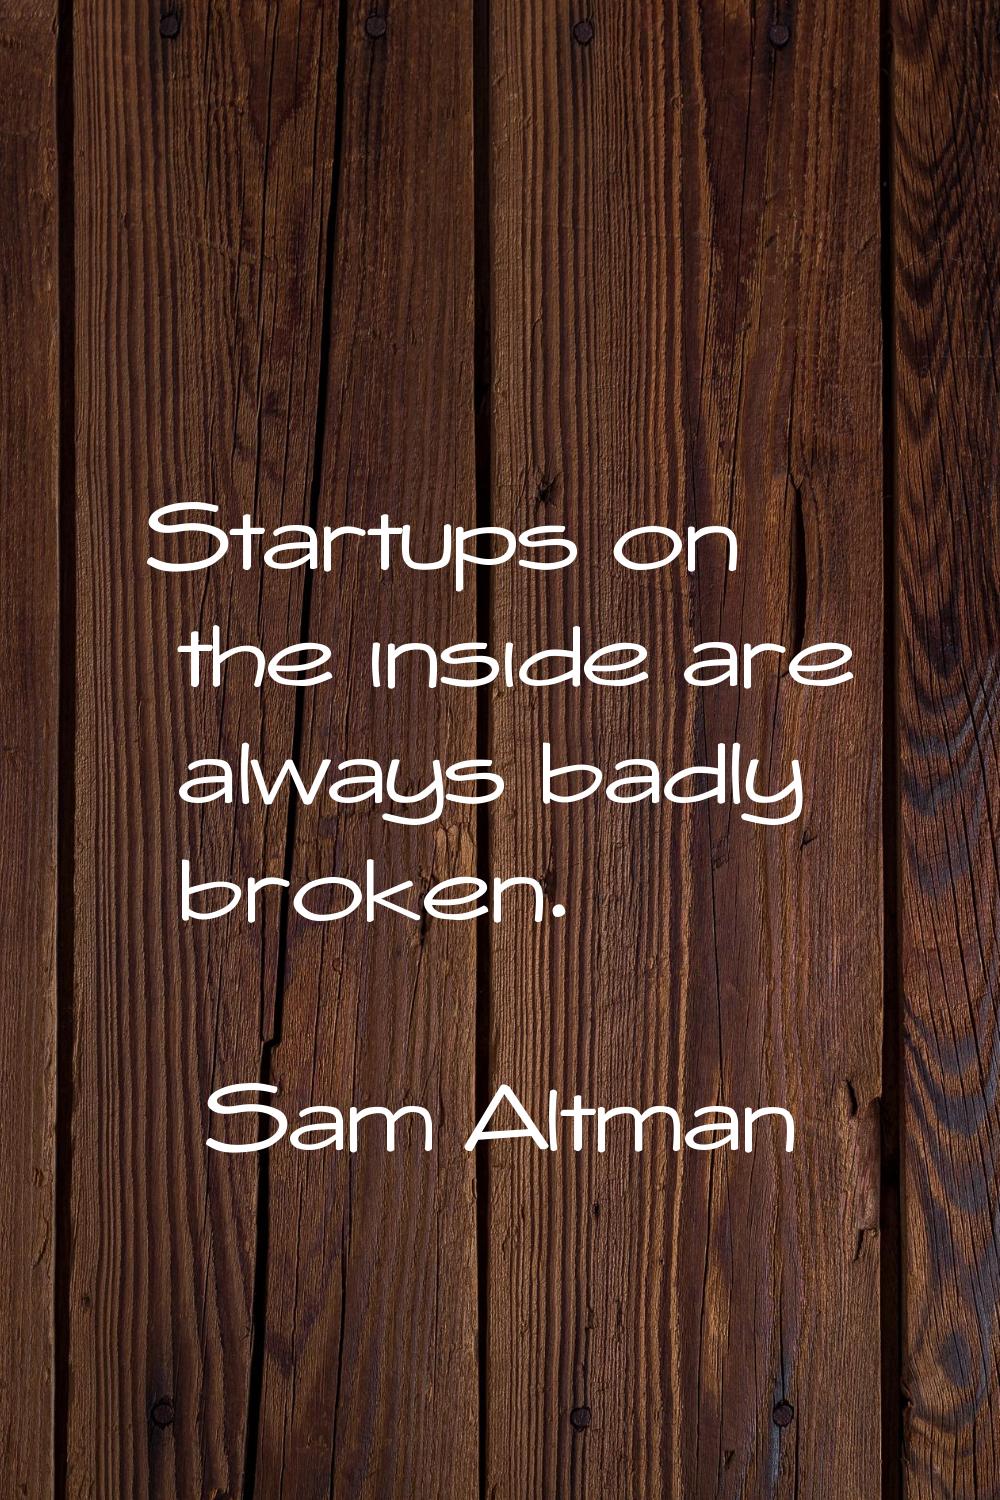 Startups on the inside are always badly broken.